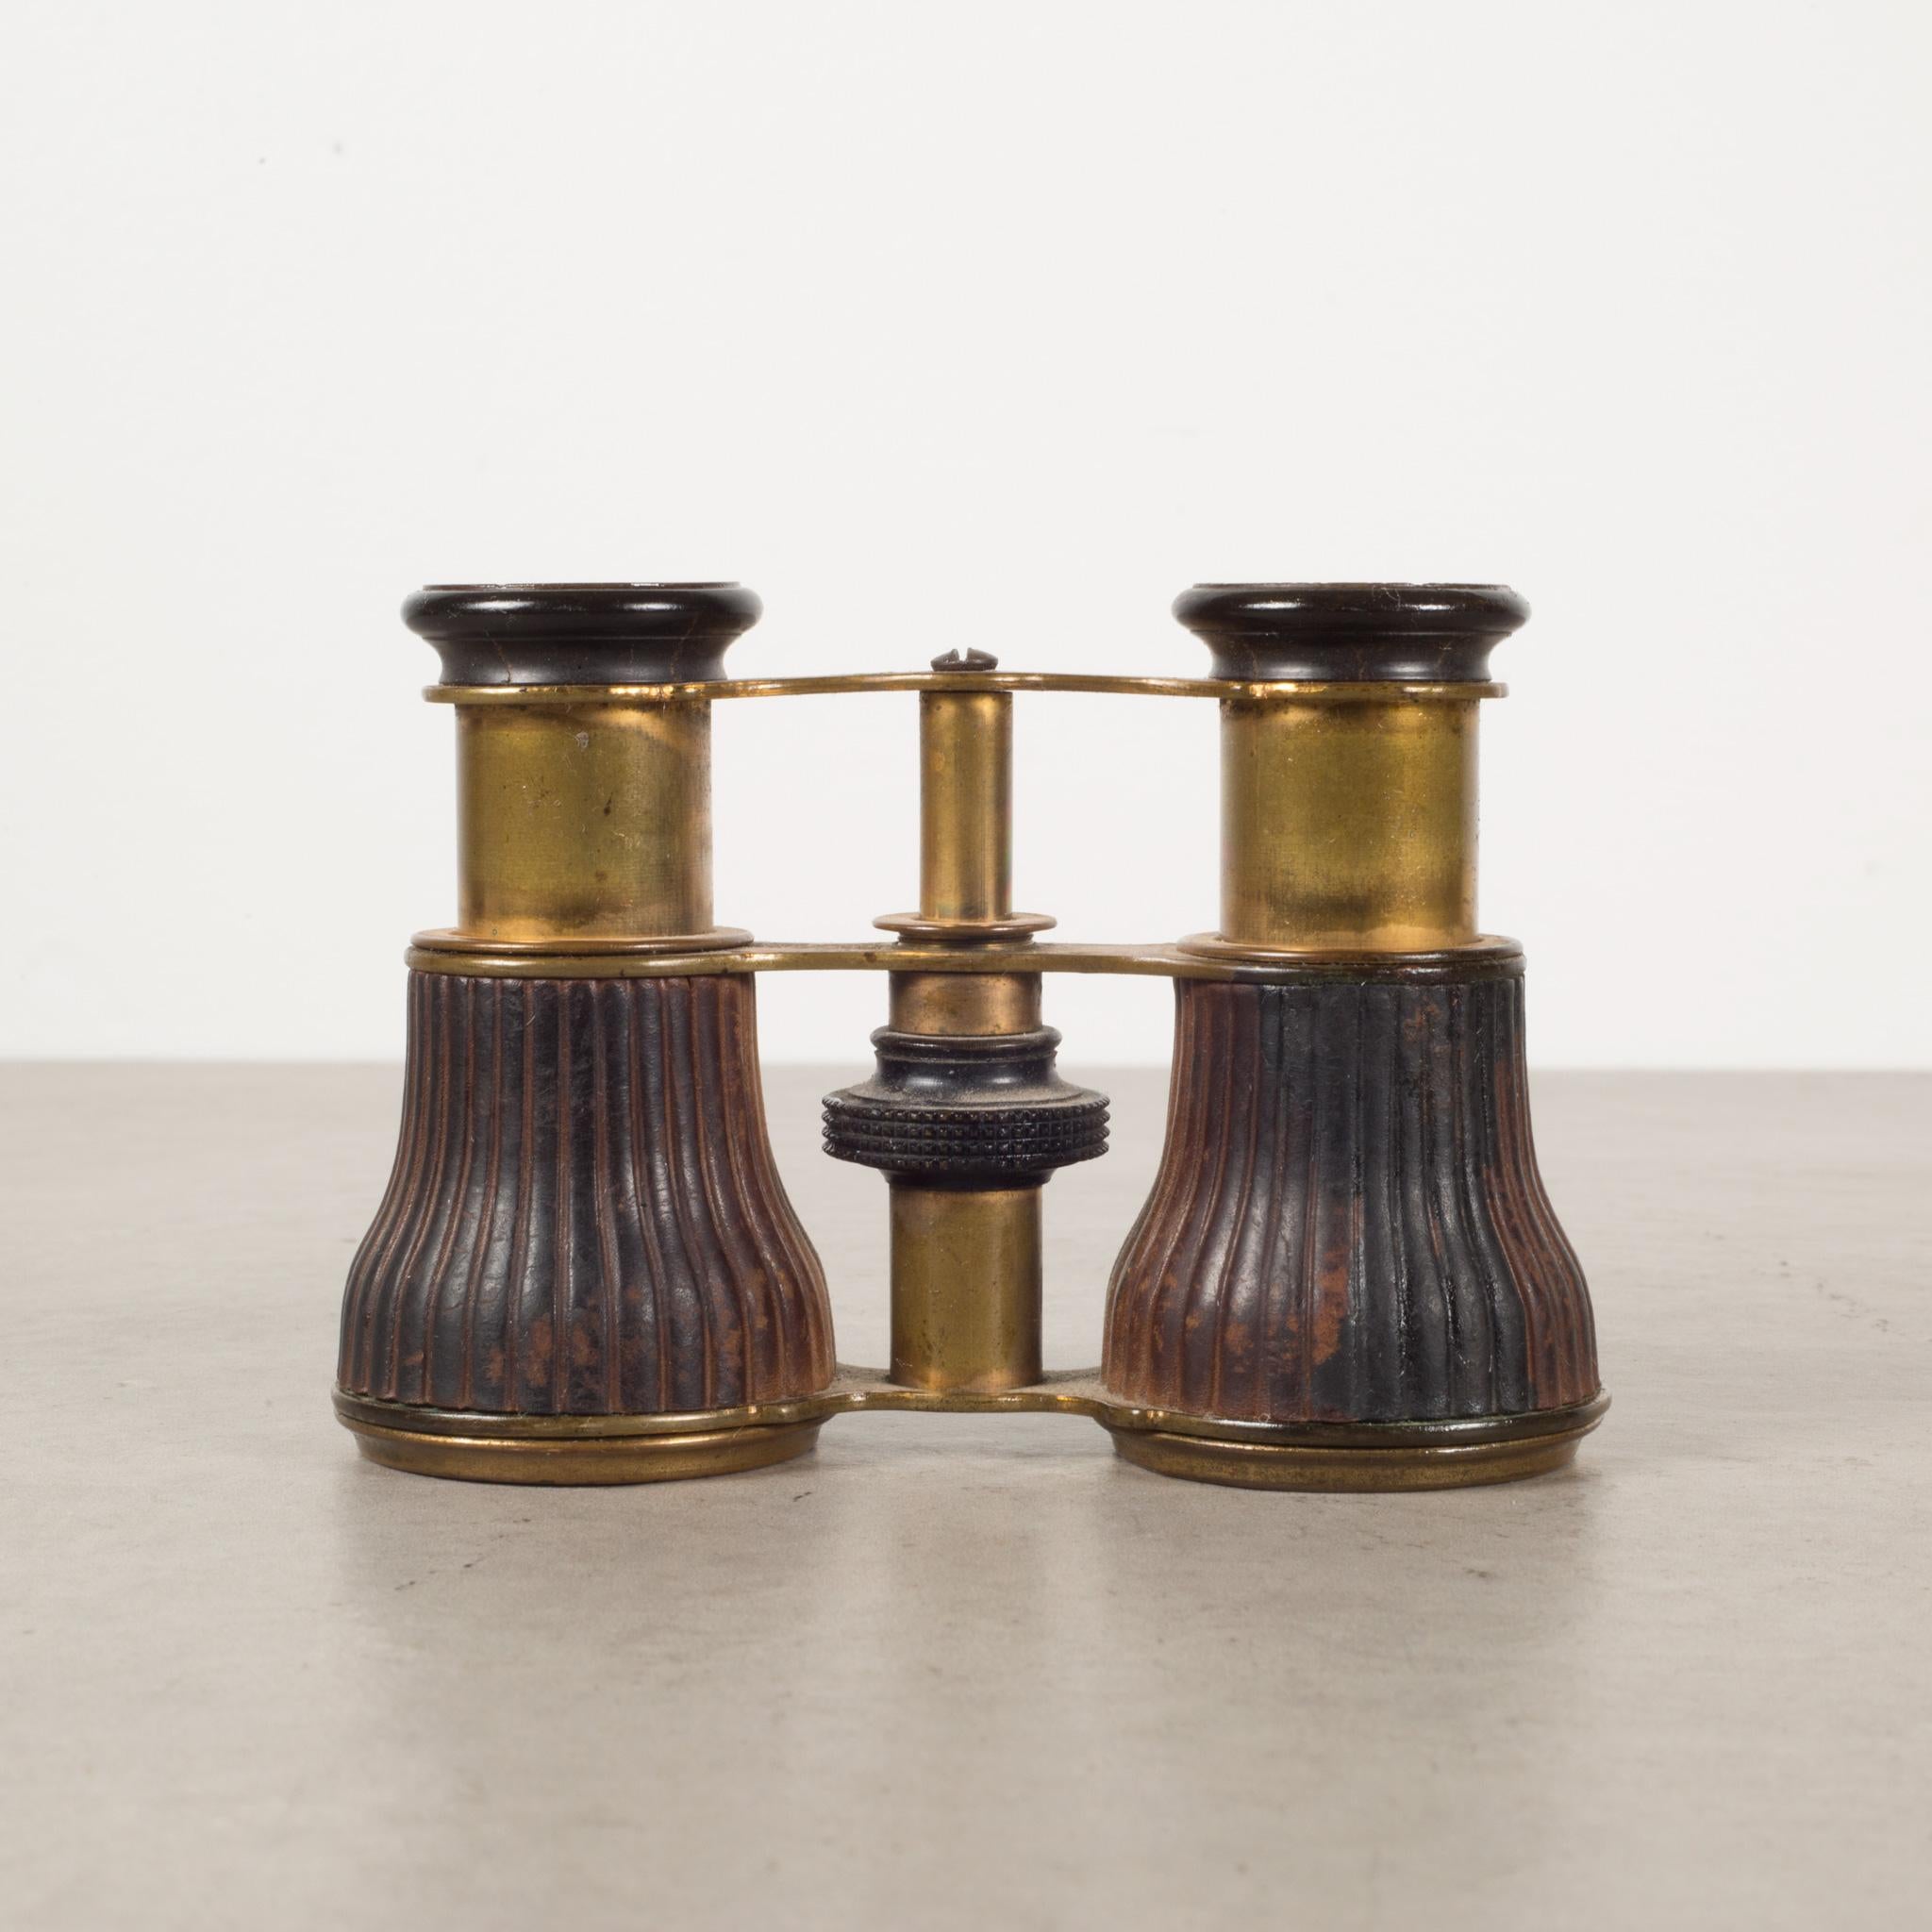 About

An original pair of ribbed brass plated opera binoculars. This piece has retained its original finish.

 Creator Unknown.
 Date of manufacture c.1880s
 Materials and techniques Brass, Optical Glass.
 Condition Good. Wear consistent